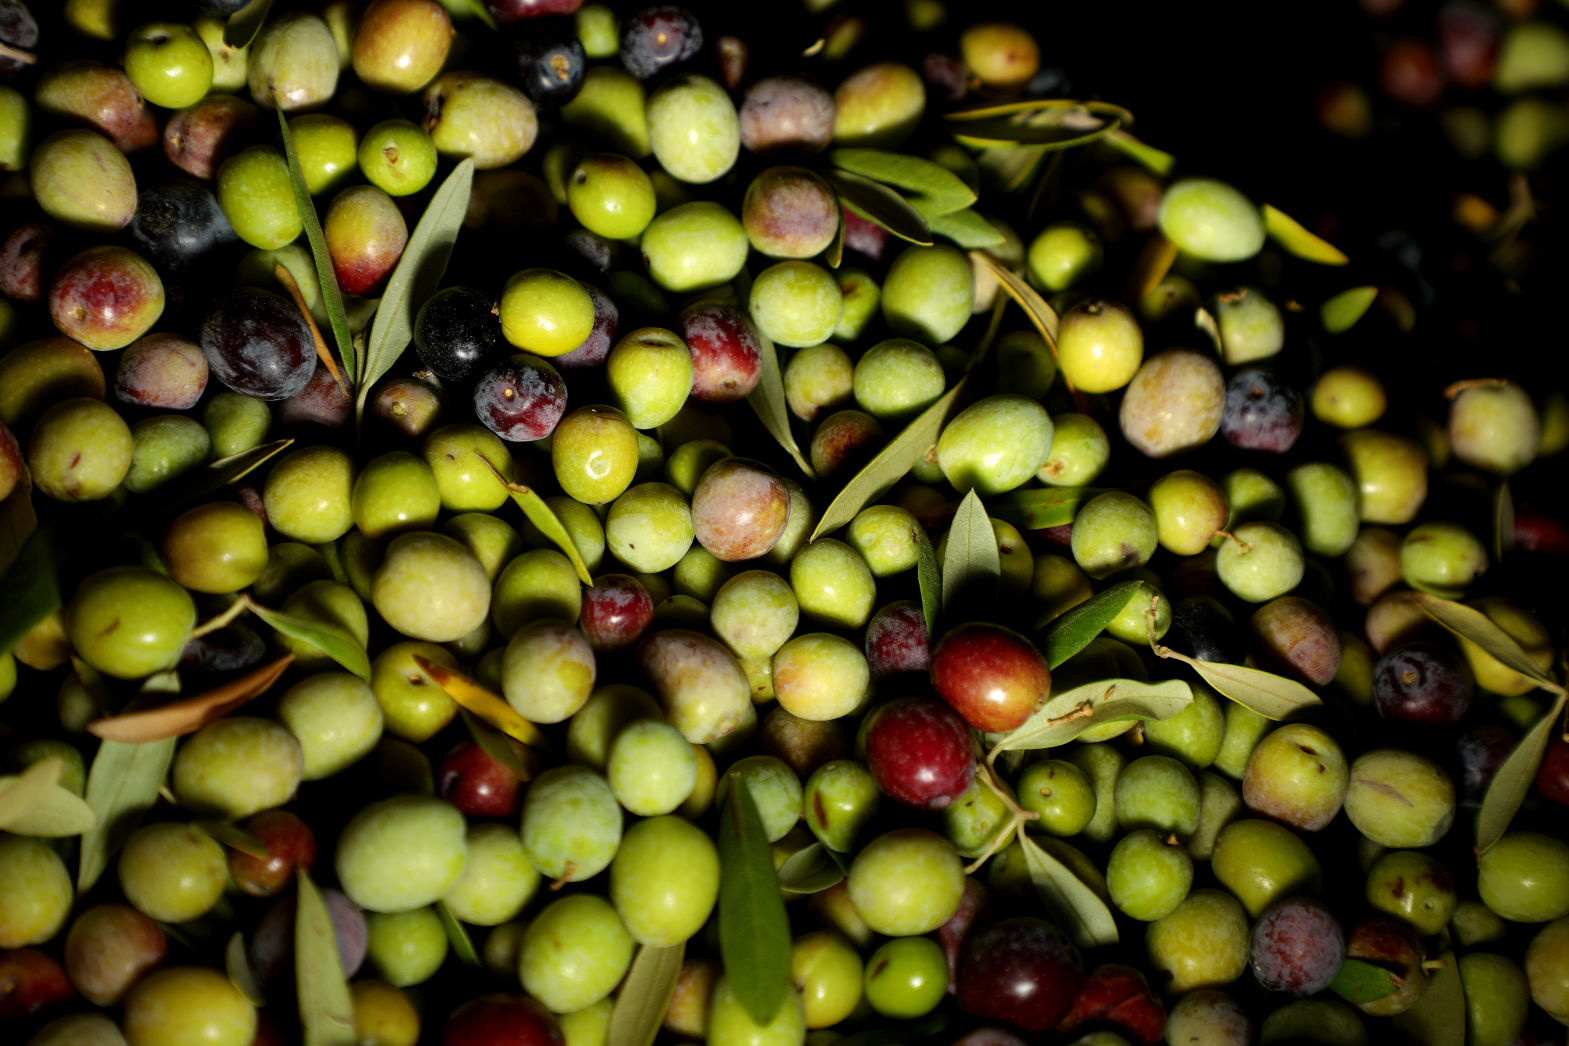 Olio nuovo: How to use and where to find season’s freshest, boldest olive oil